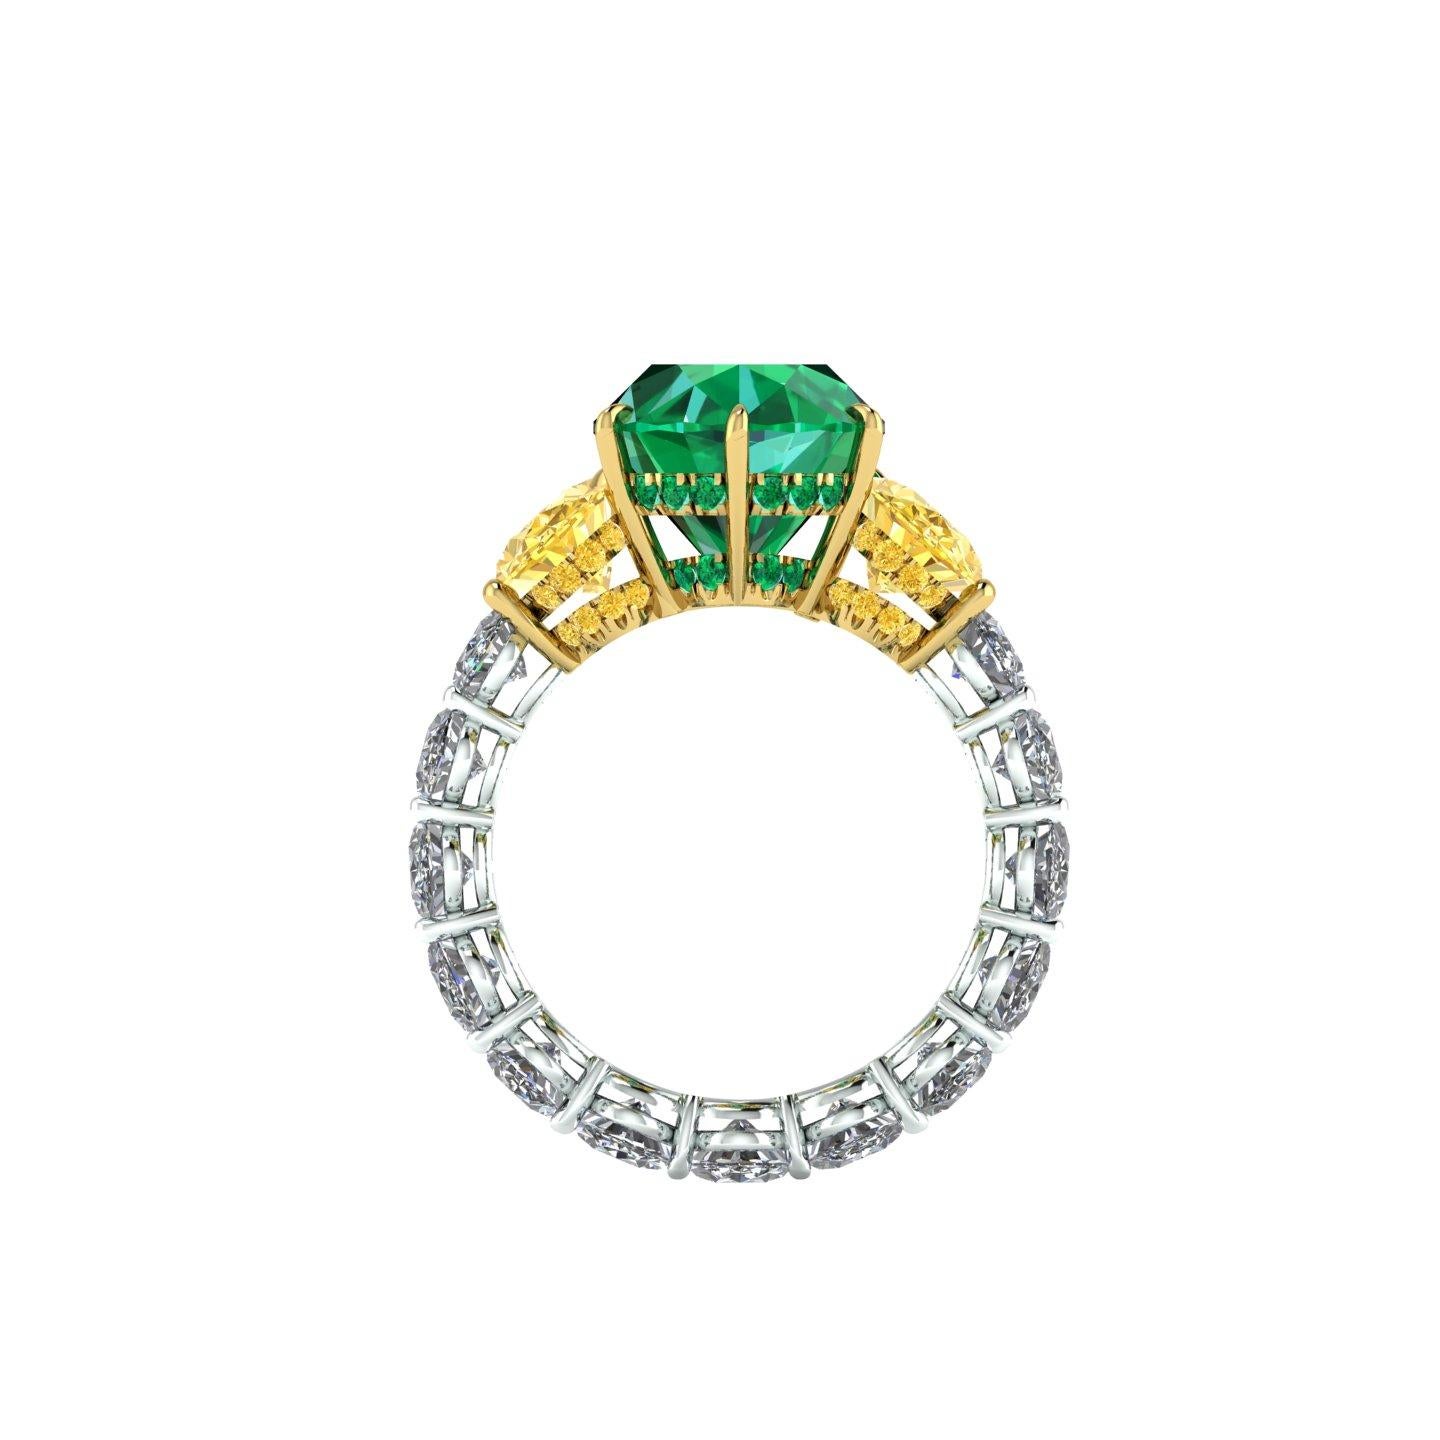 Oval Cut 5.37 Carat Oval Emerald Yellow and White Oval Diamonds Platinum 18k Gold Ring